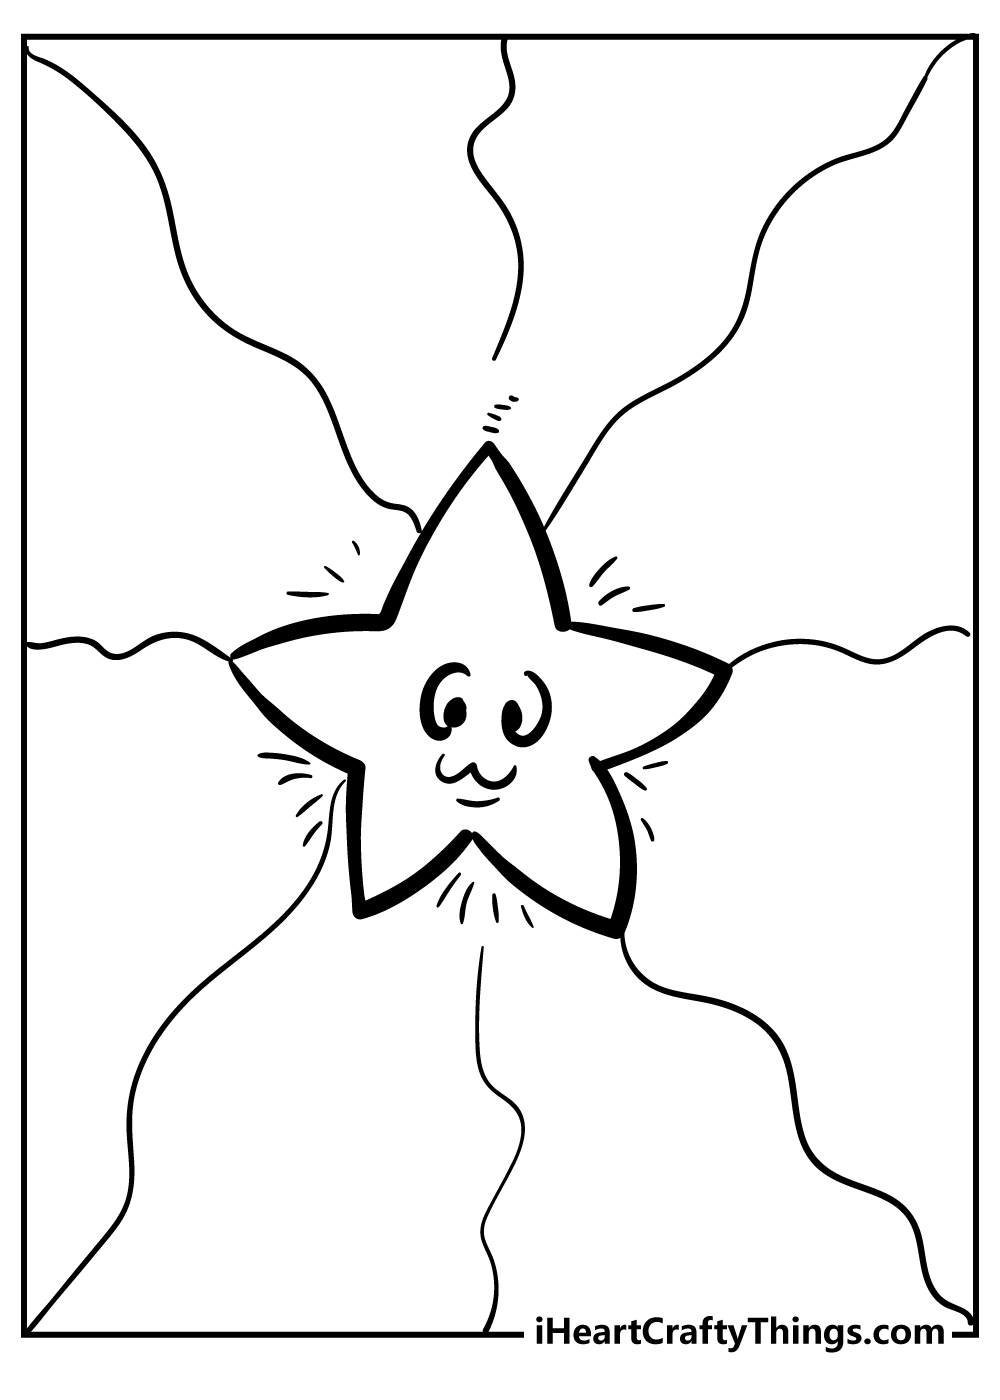 Star coloring pages free printable